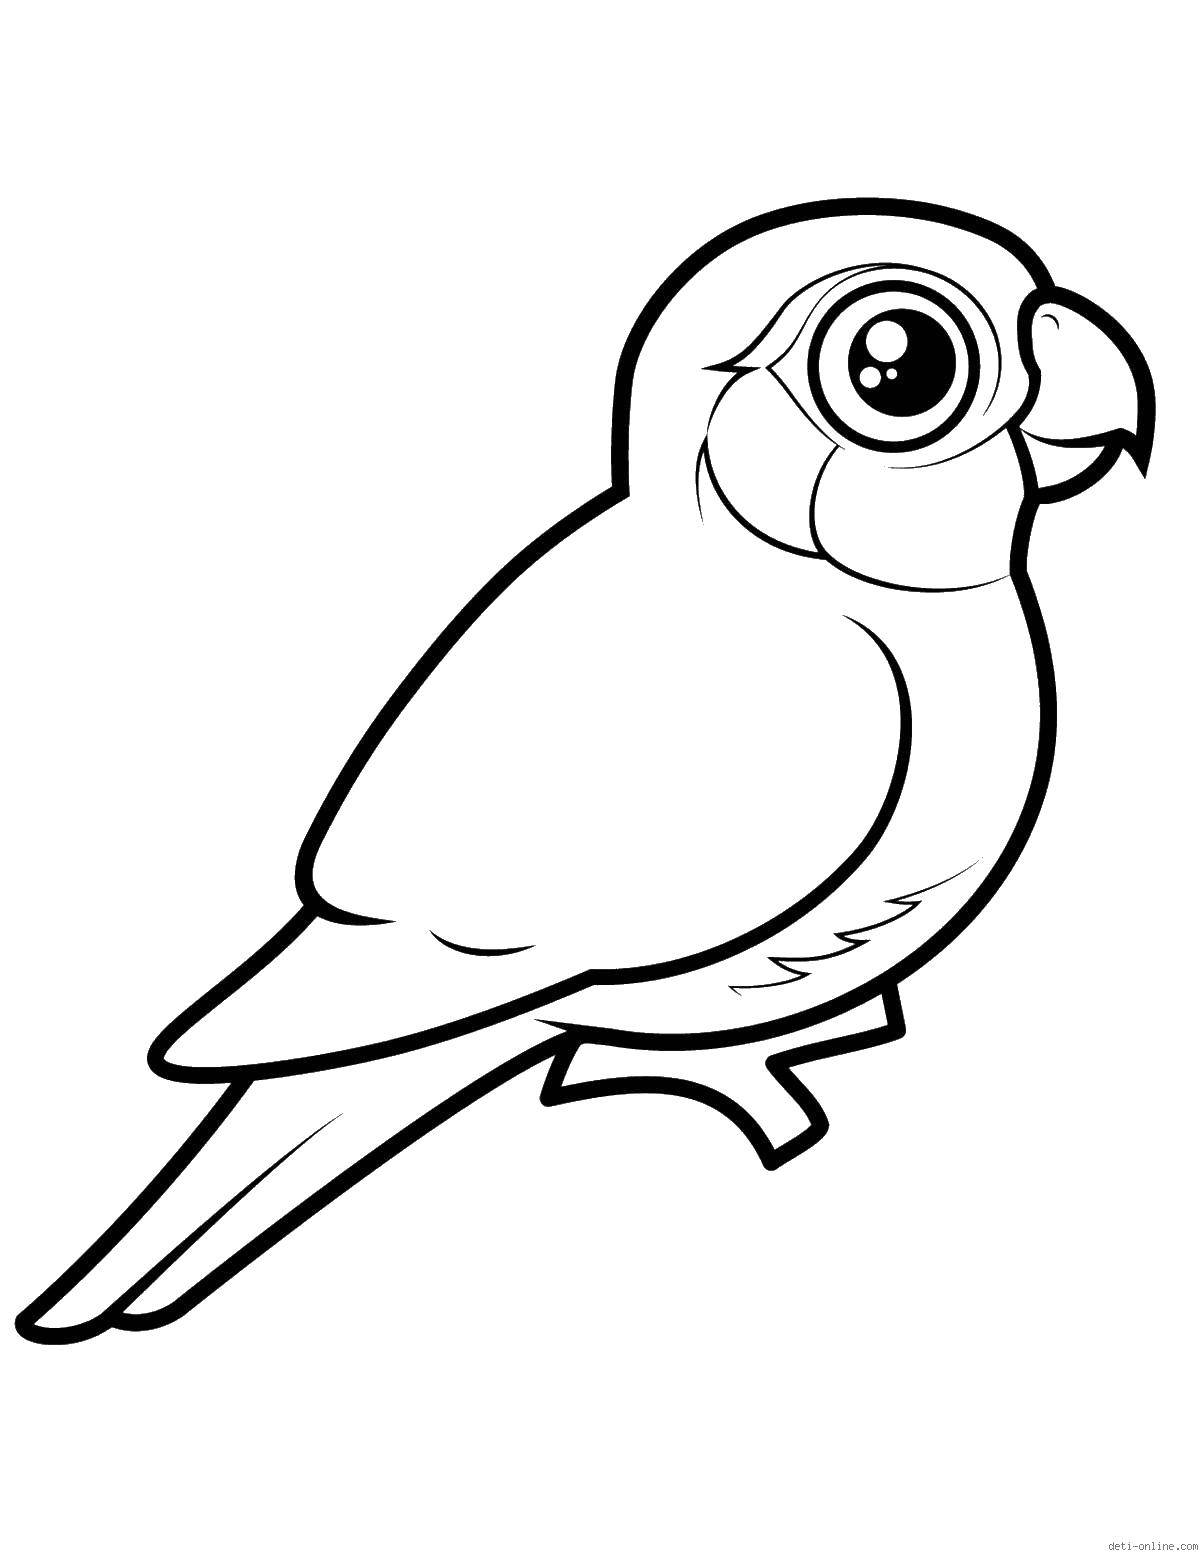 Coloring Parrot on twig. Category birds. Tags:  parrot, branch, bird, eyes.